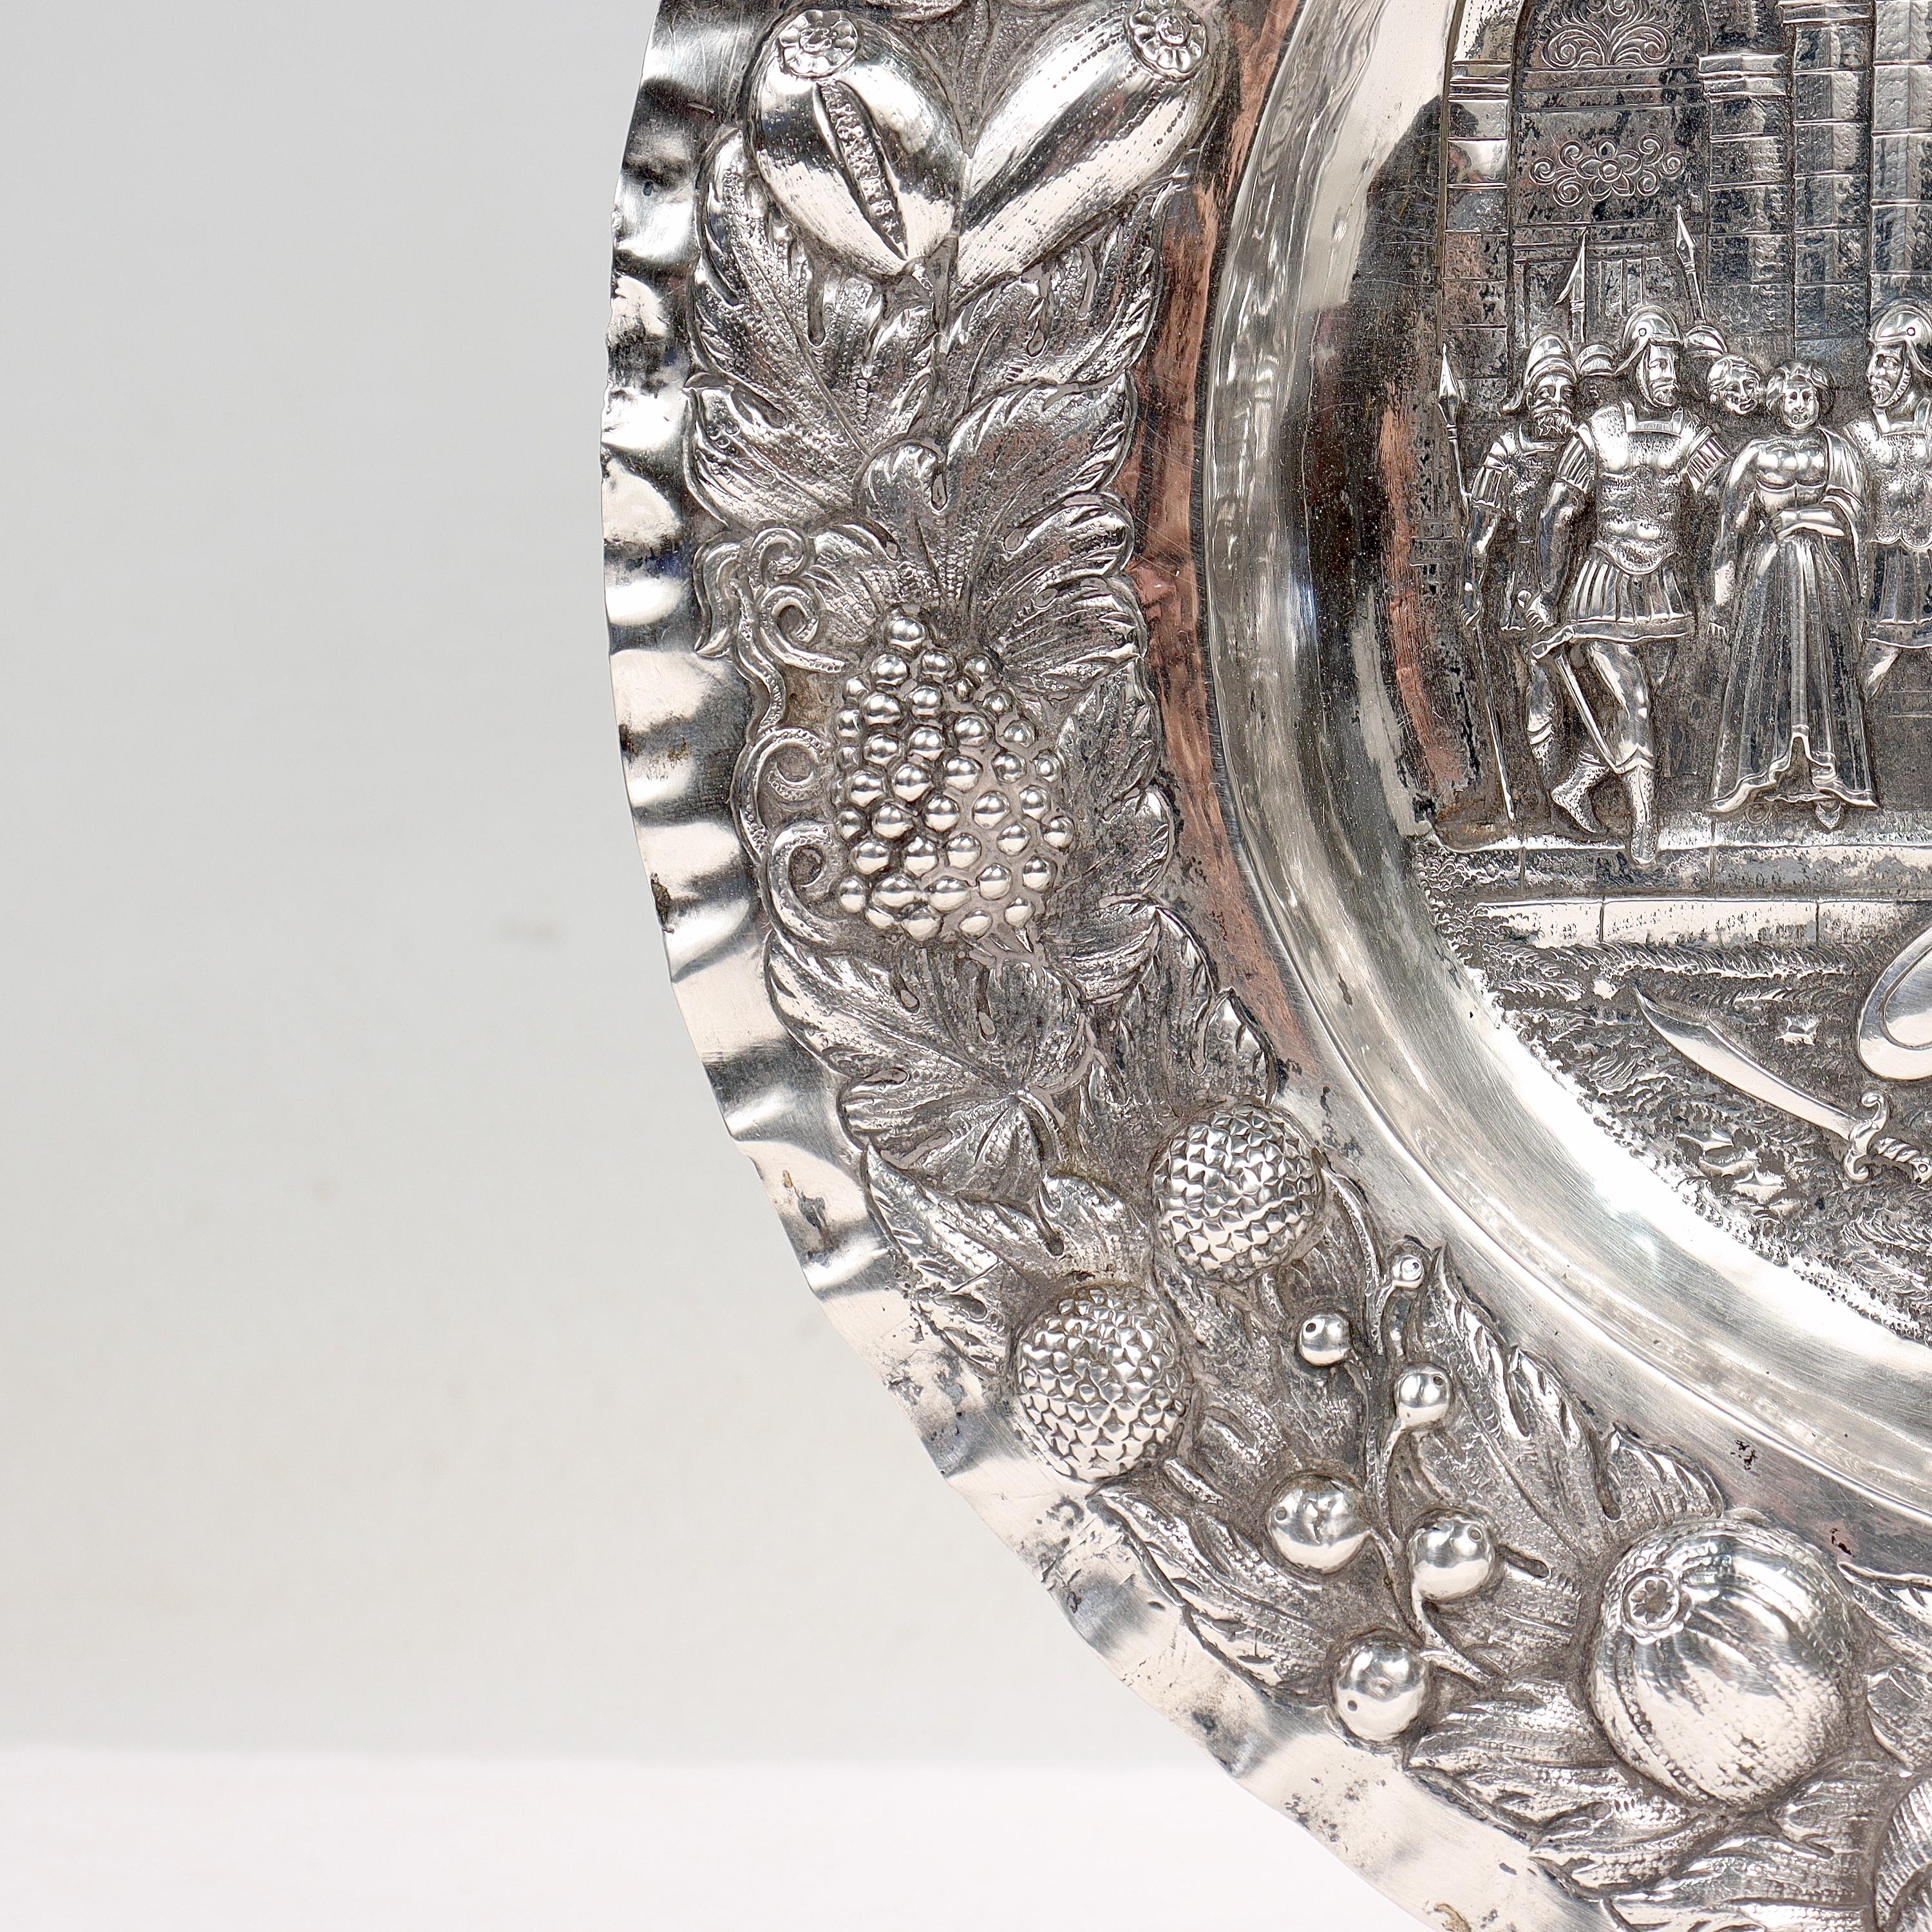 Antique German Renaissance Revival Solid 800 Silver Repousse Tray or Charger For Sale 2